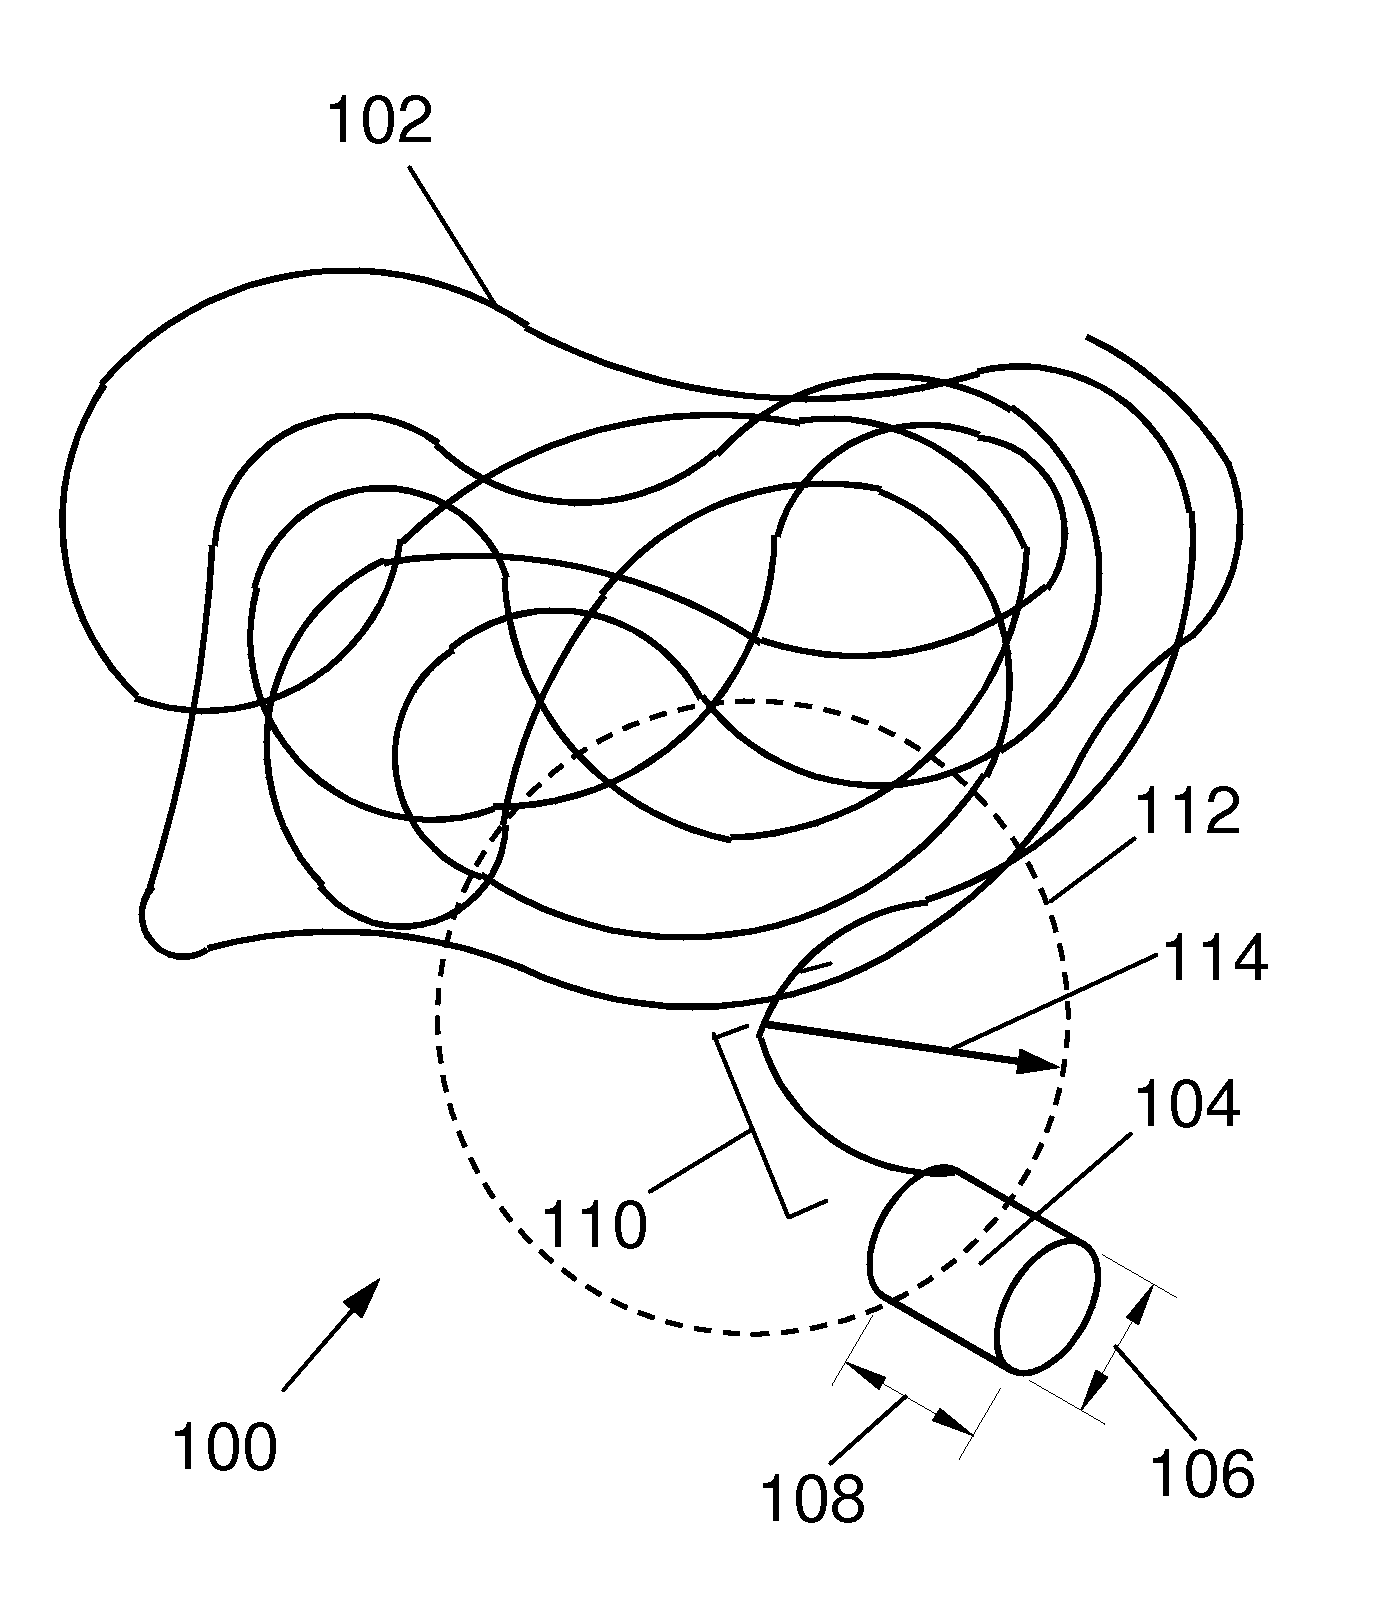 System and method for localization of large numbers of fluorescent markers in biological samples